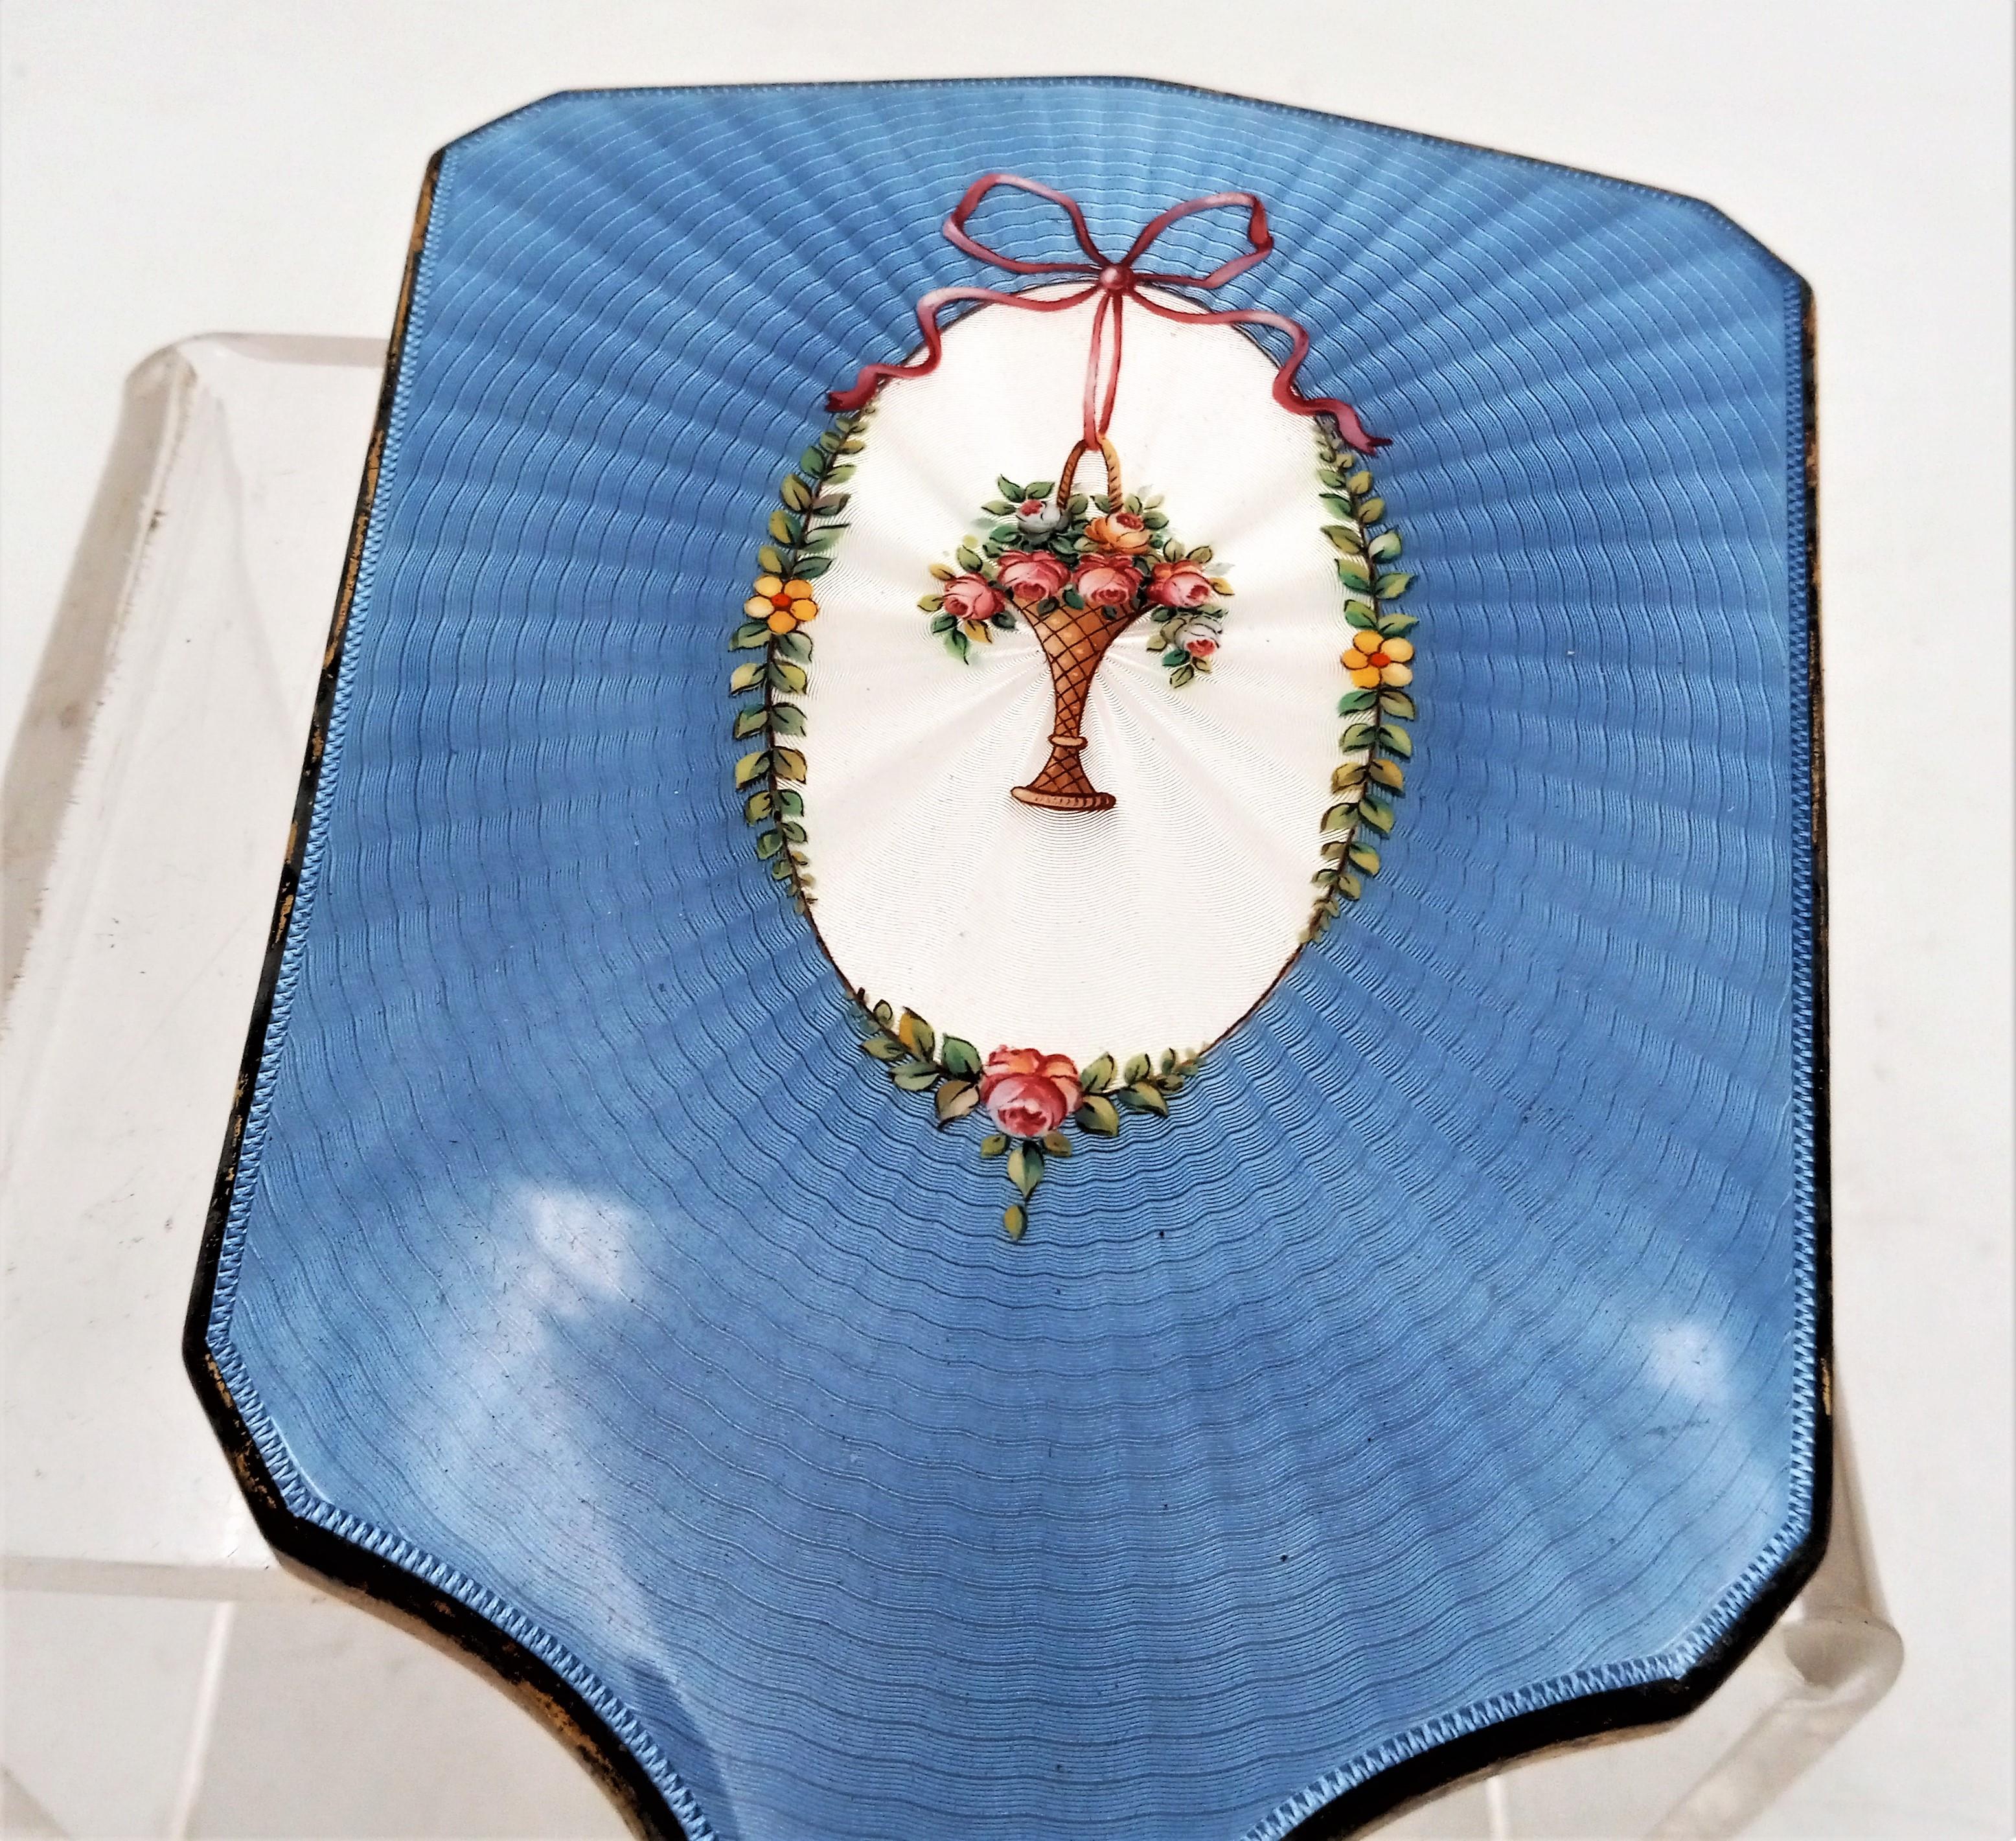 3-Piece Brush & Mirror Set with Hand-Wrought Silver Handles & Enamel Inlay, Circ In Good Condition For Sale In New York, NY